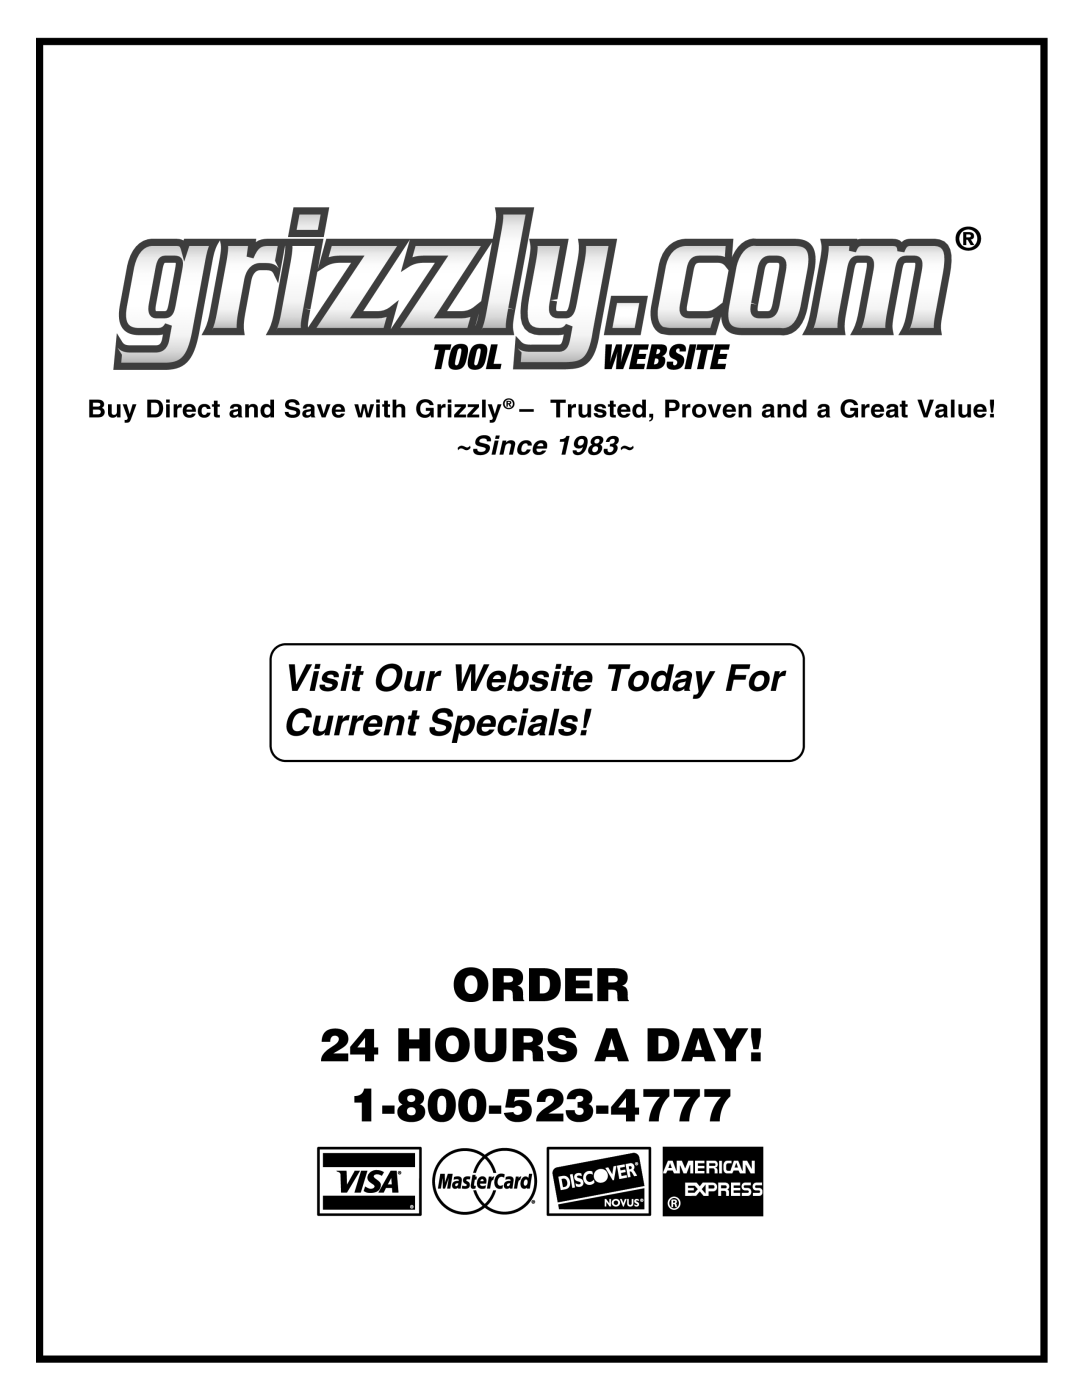 Grizzly G0710 ORDER 24 HOURS A DAY, Buy Direct and Save with Grizzly - Trusted, Proven and a Great Value, ~Since 1983~ 